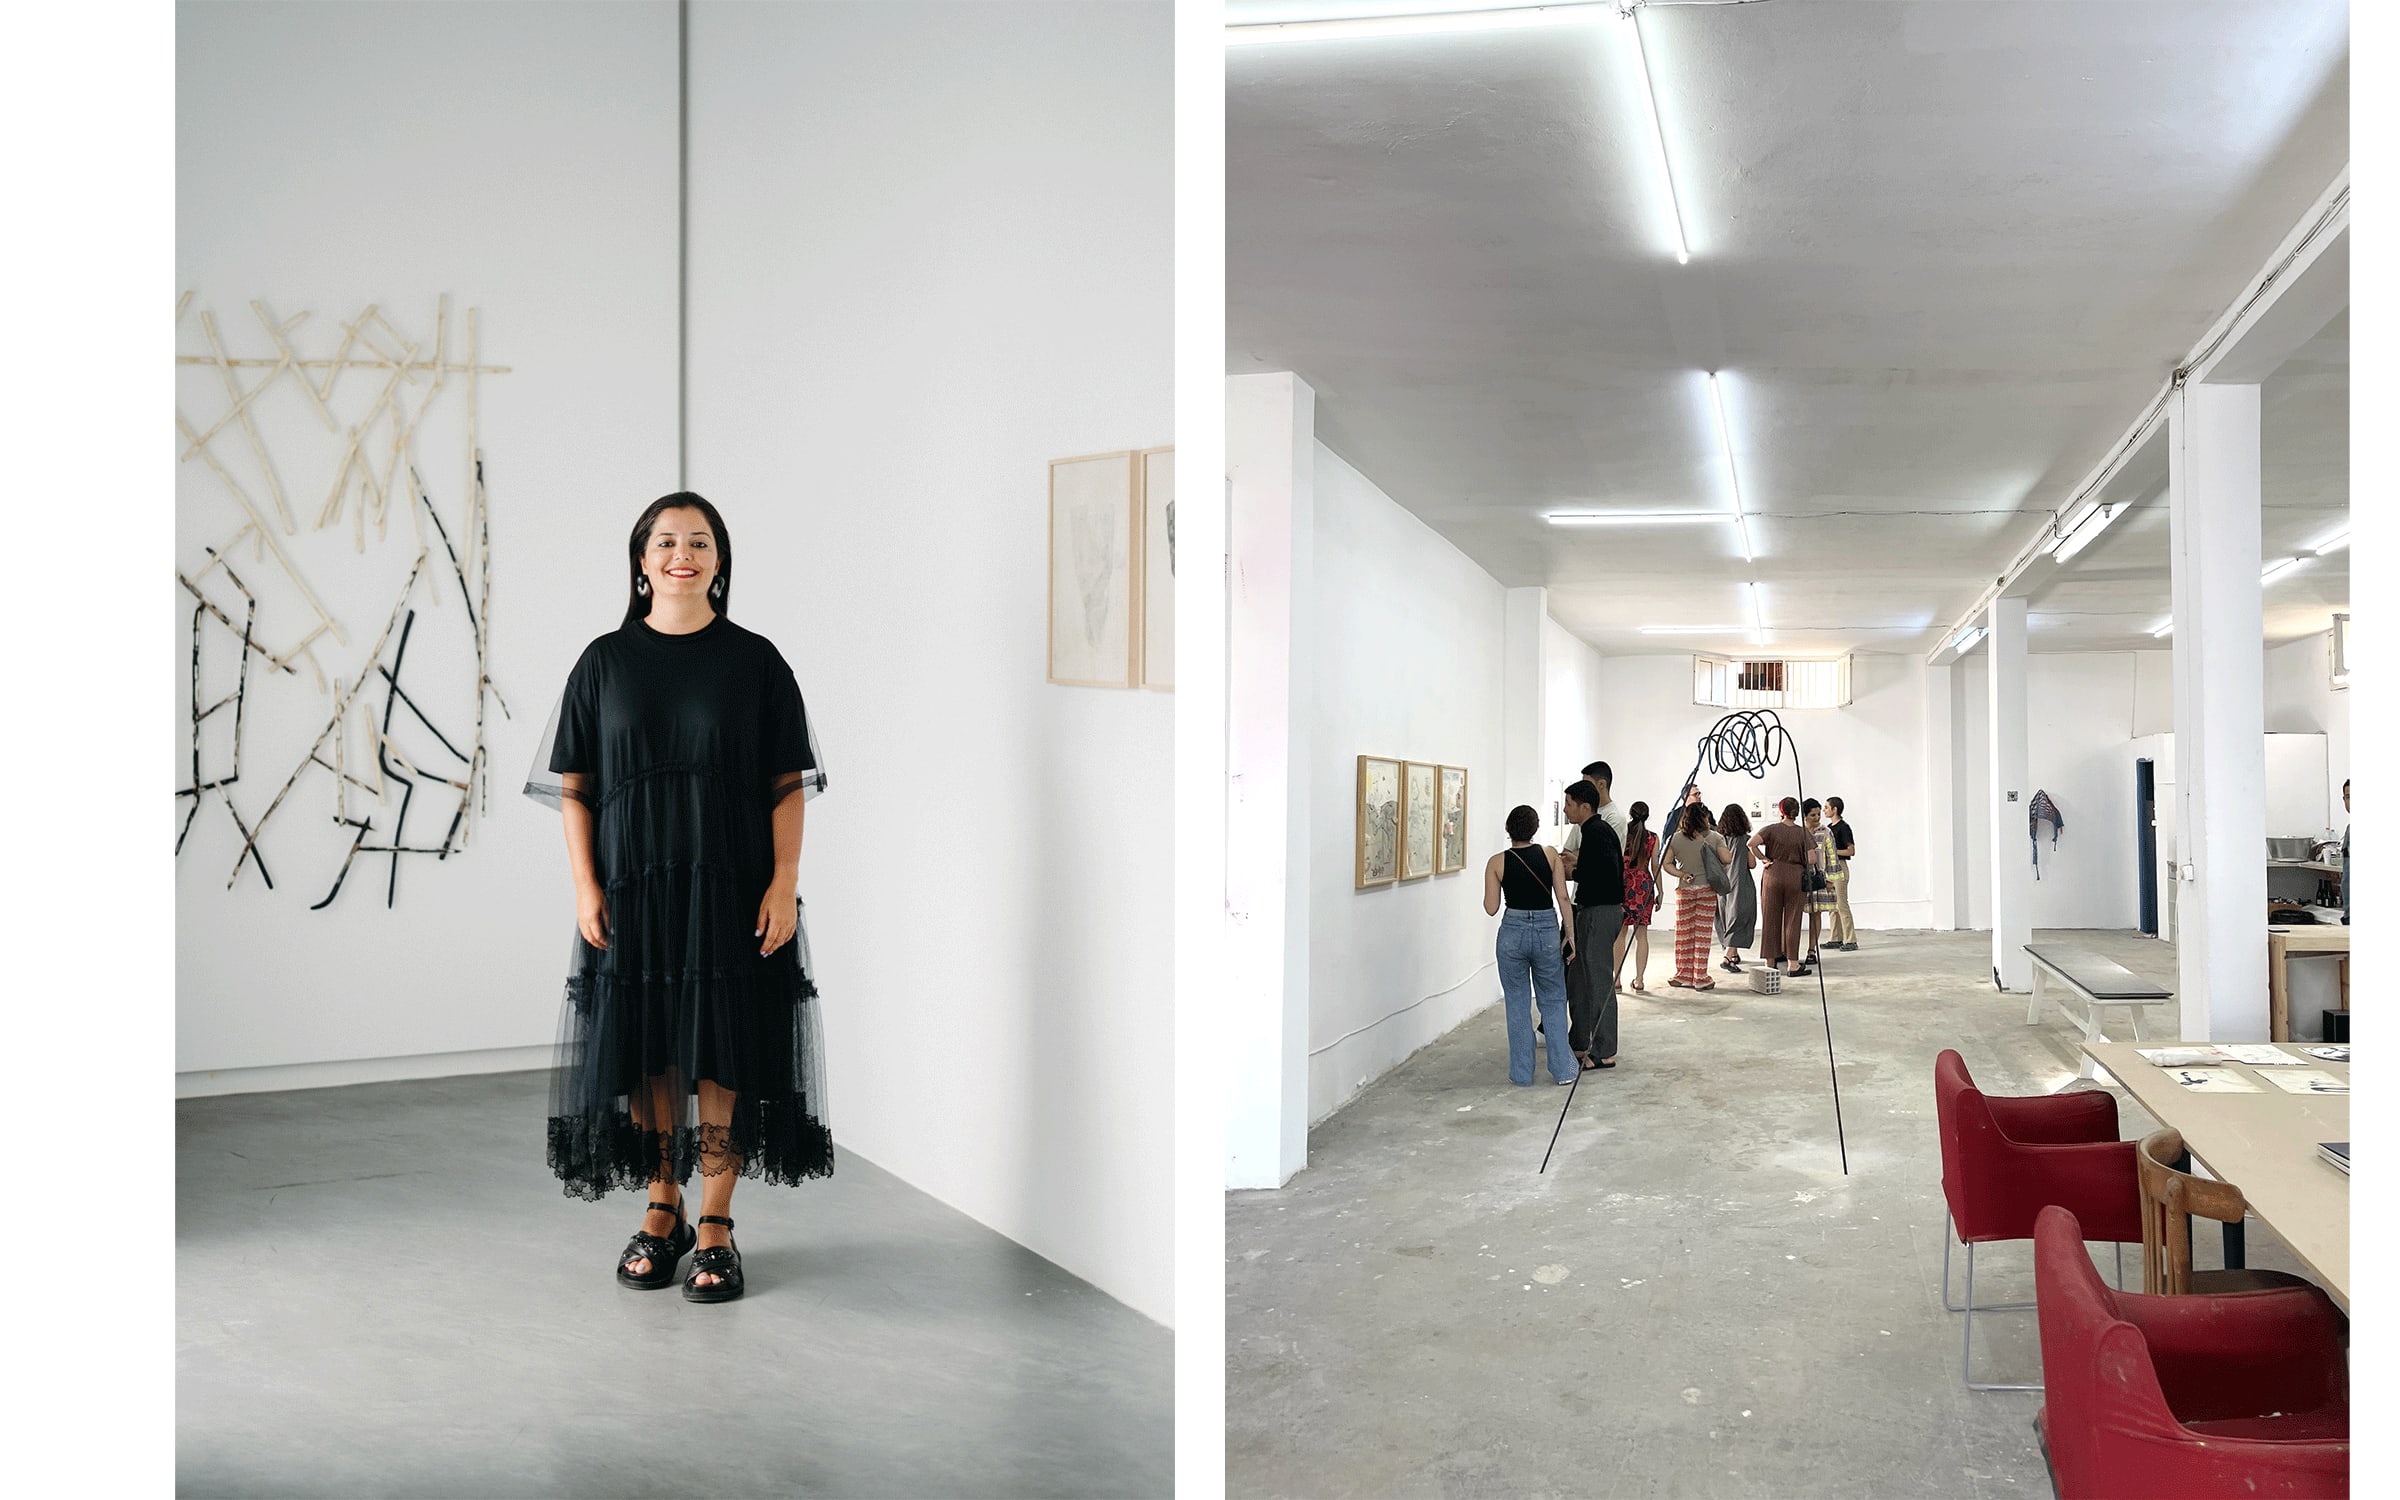 Left: Selma Feriani. Courtesy of Paul Mesnager and Selma Feriani Gallery. Right: The Selma Feriani Gallery Atelier. Photograph by Sonia Kacem. Courtesy of the artists and Gallery Selma Feriani.